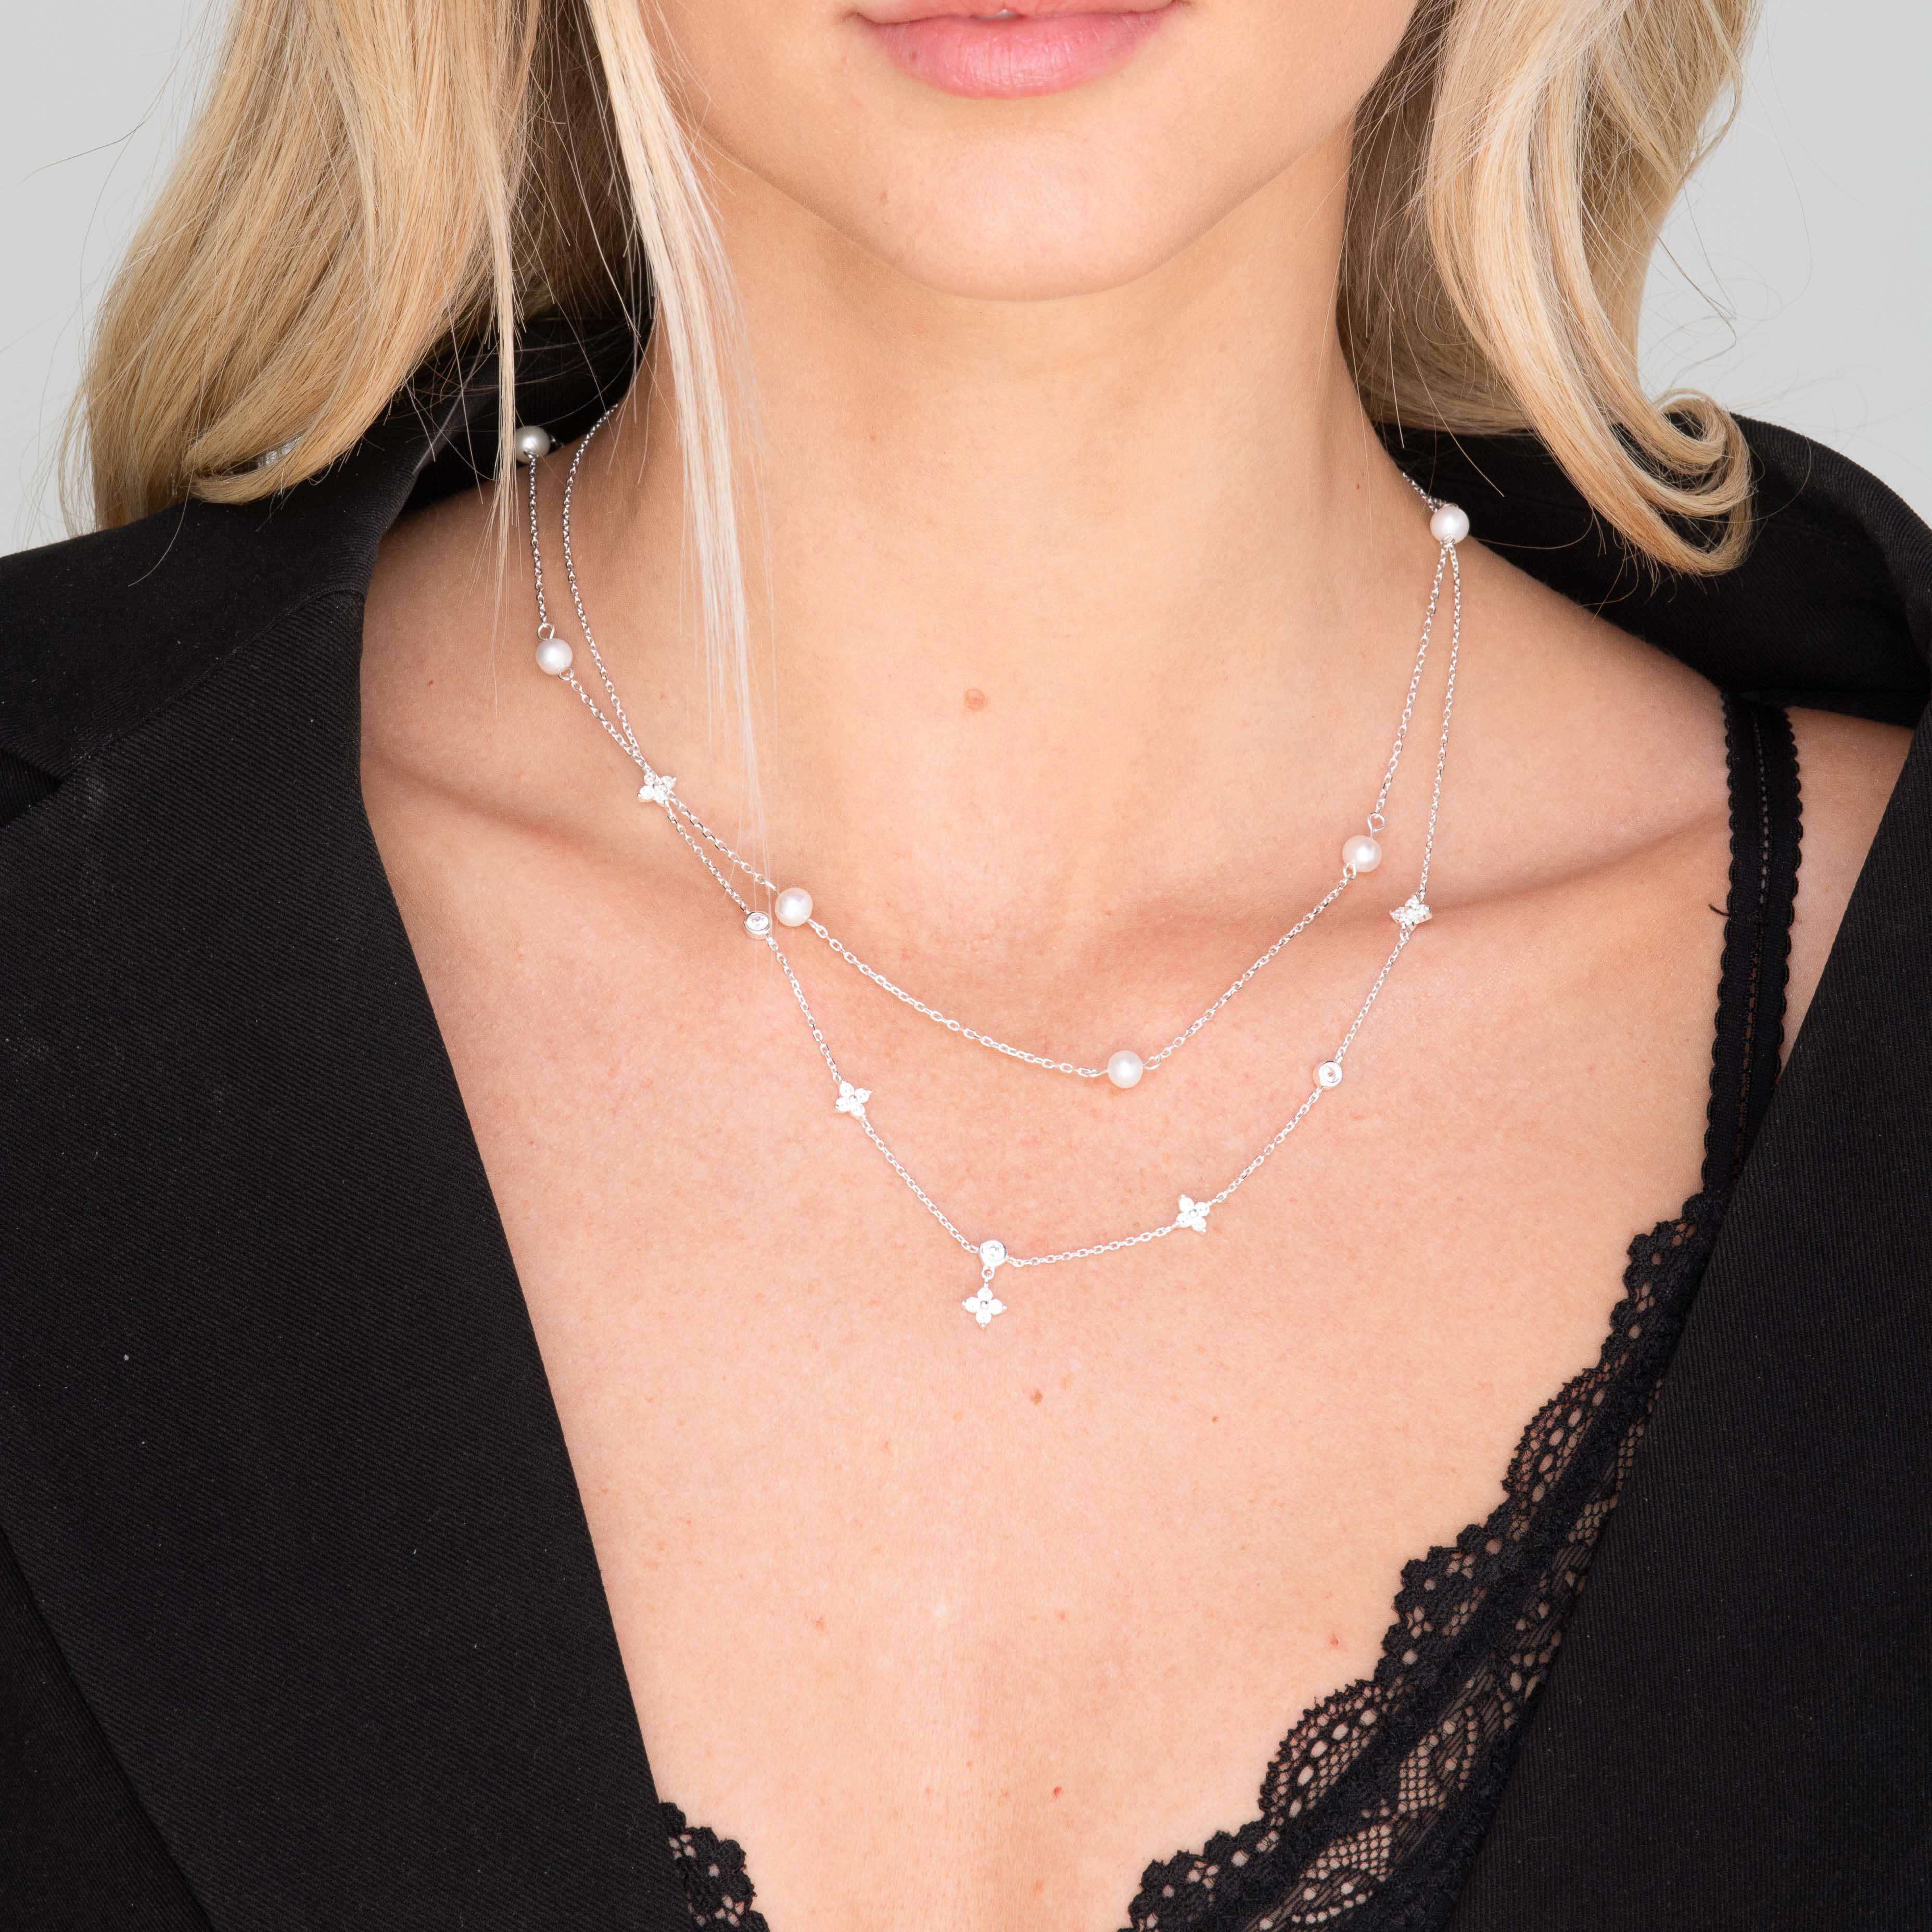 Clover Station Zirconia Chain Necklace